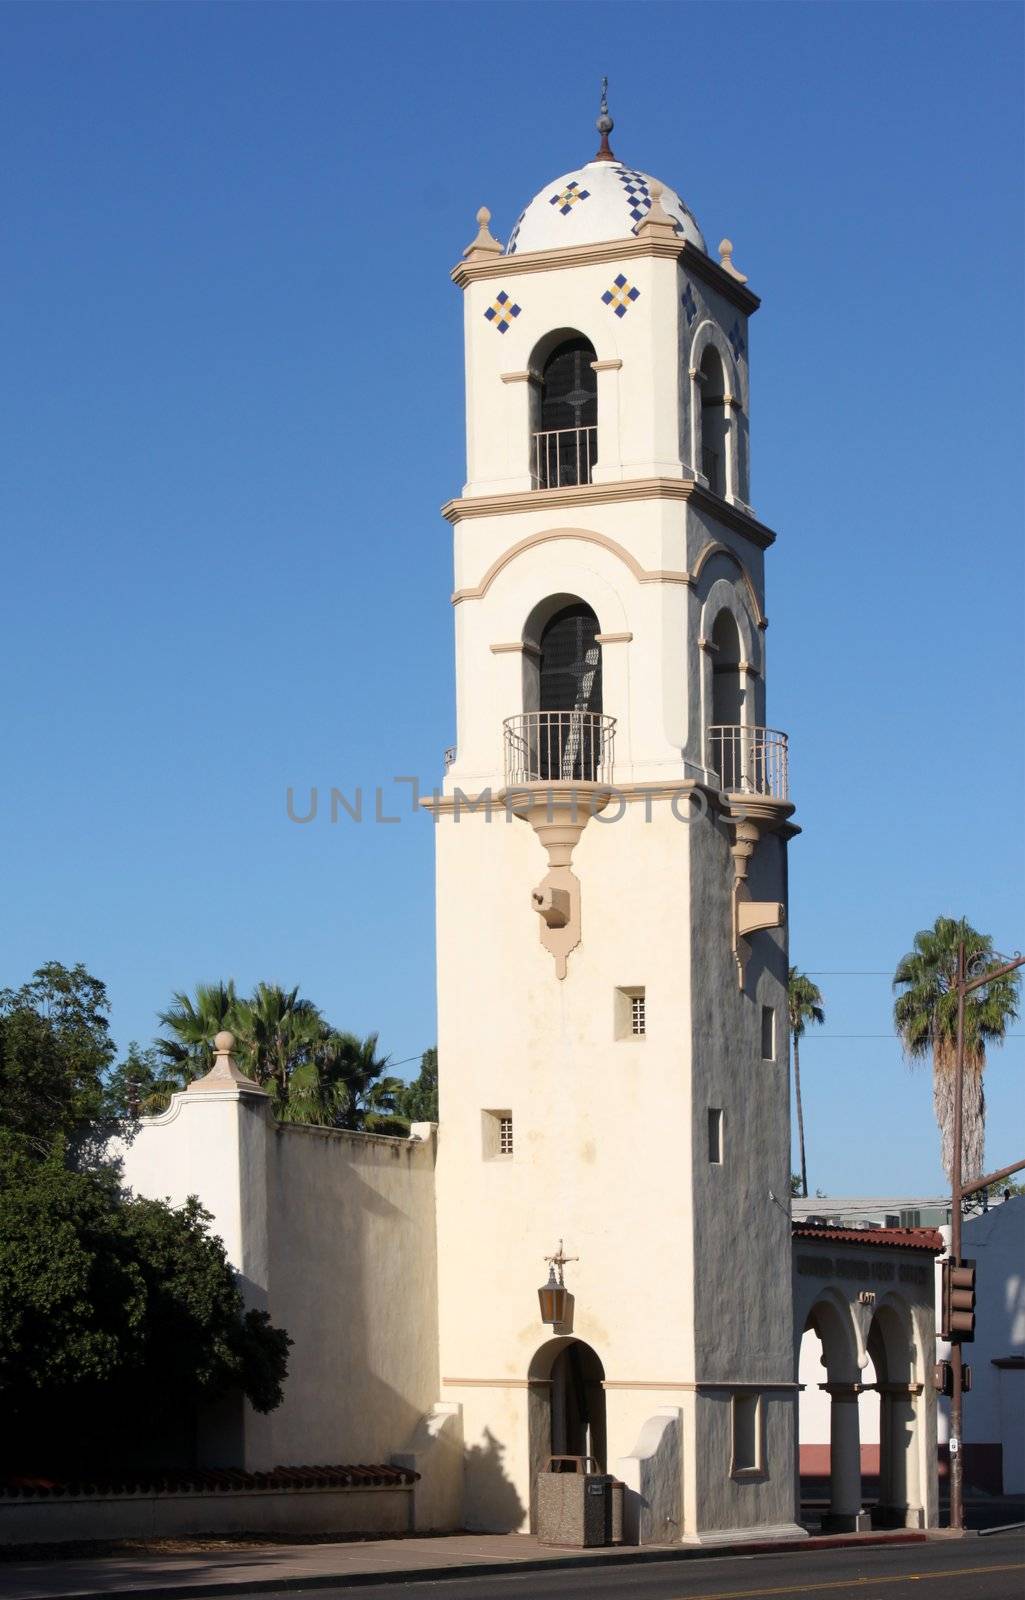 Ojai Post Office Tower by hlehnerer